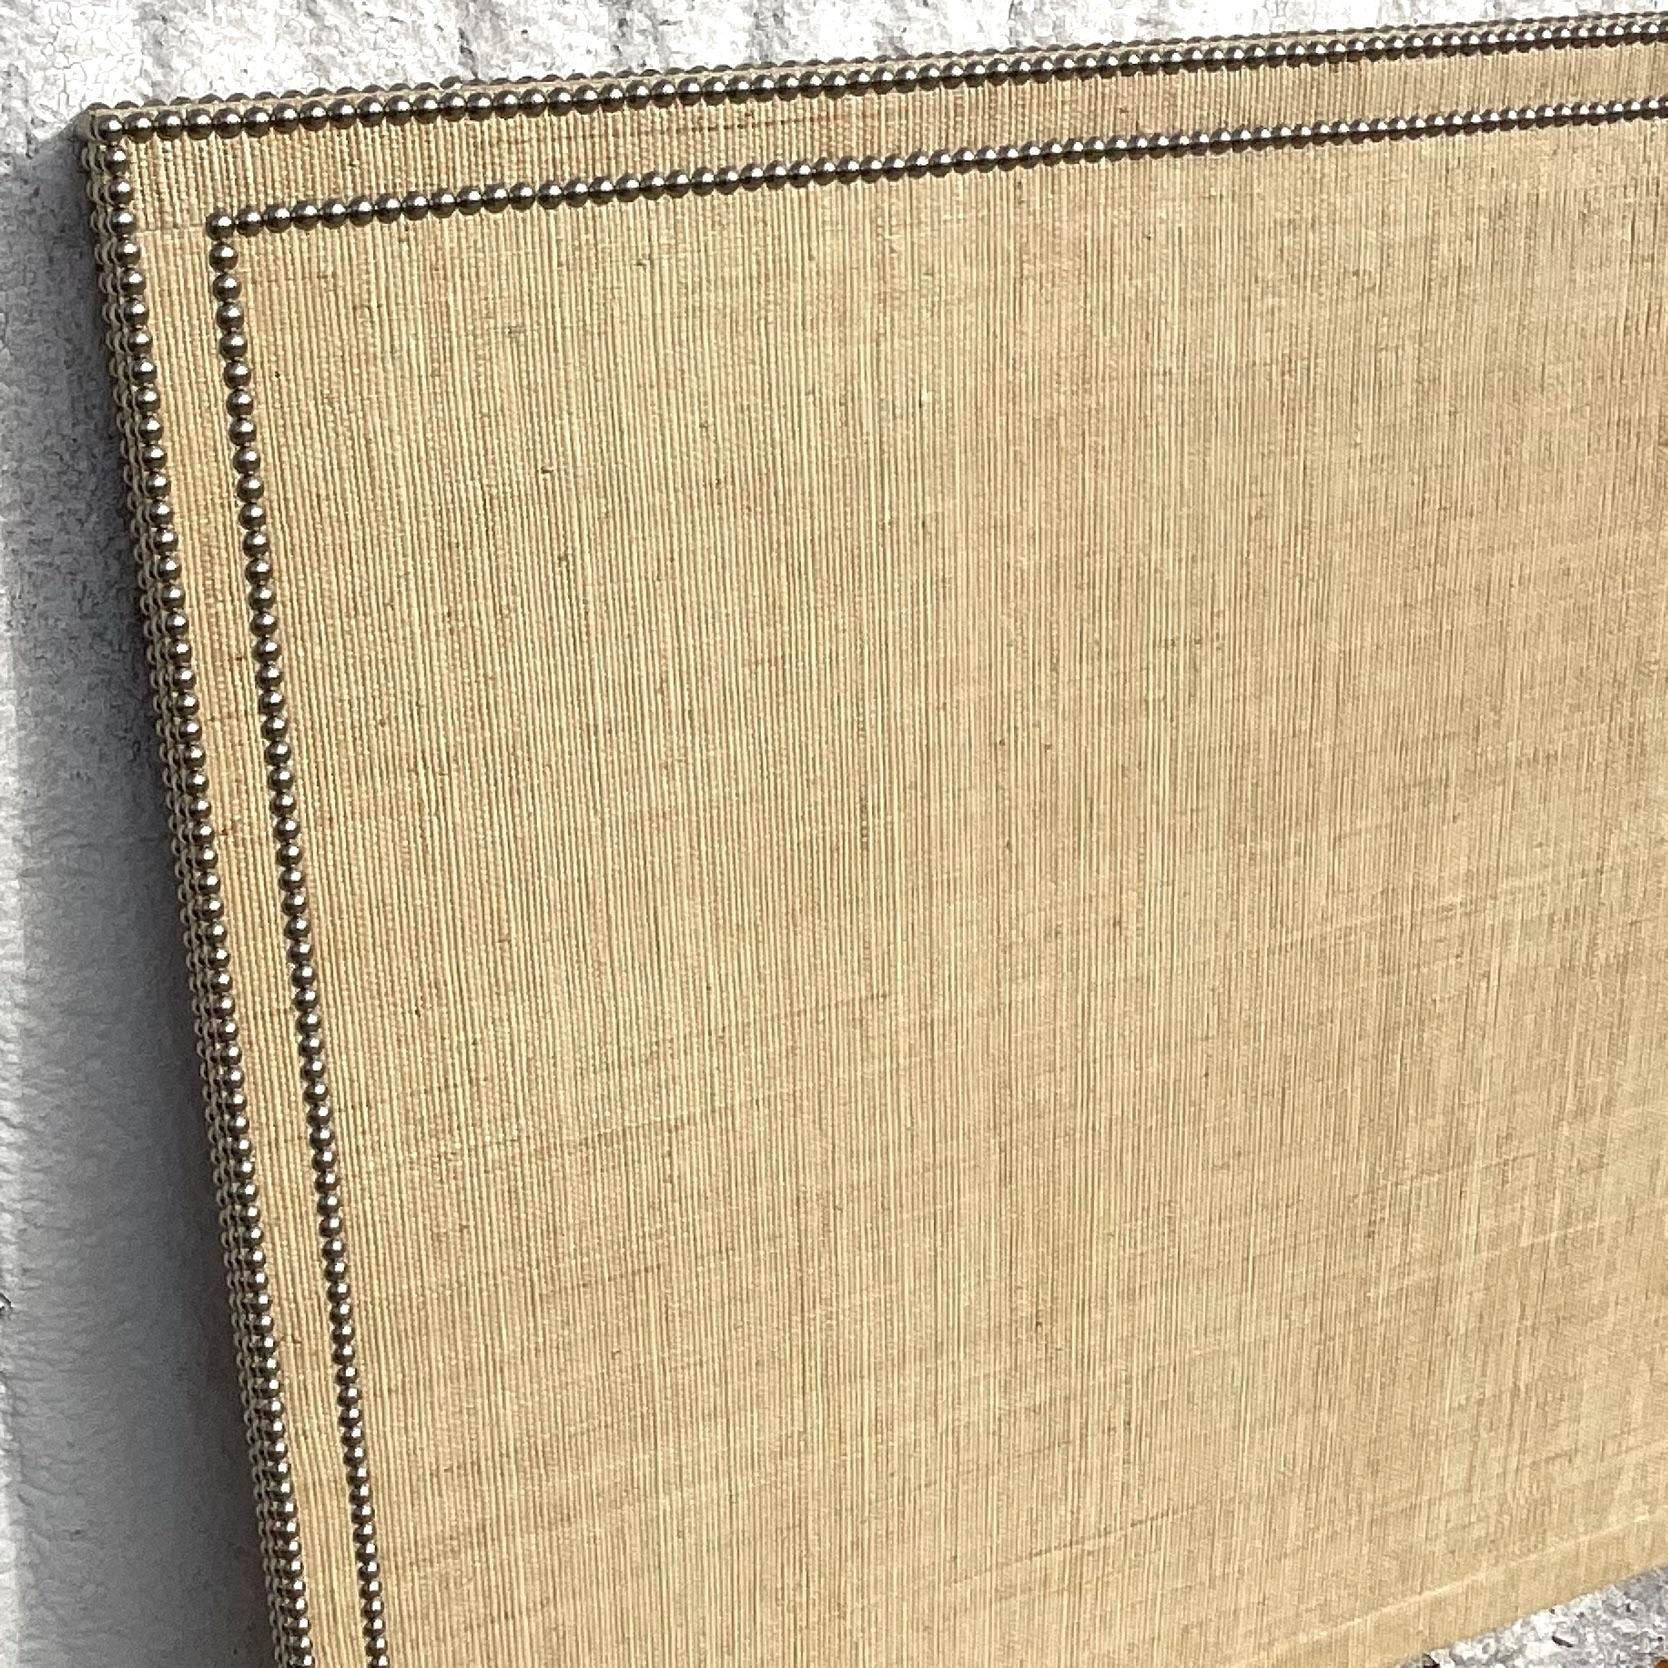 A fantastic vintage Coastal Queen headboard. A chic Grasscloth wrapped headboard with a gorgeous nailhead trim. Acquired from a Palm Beach estate.